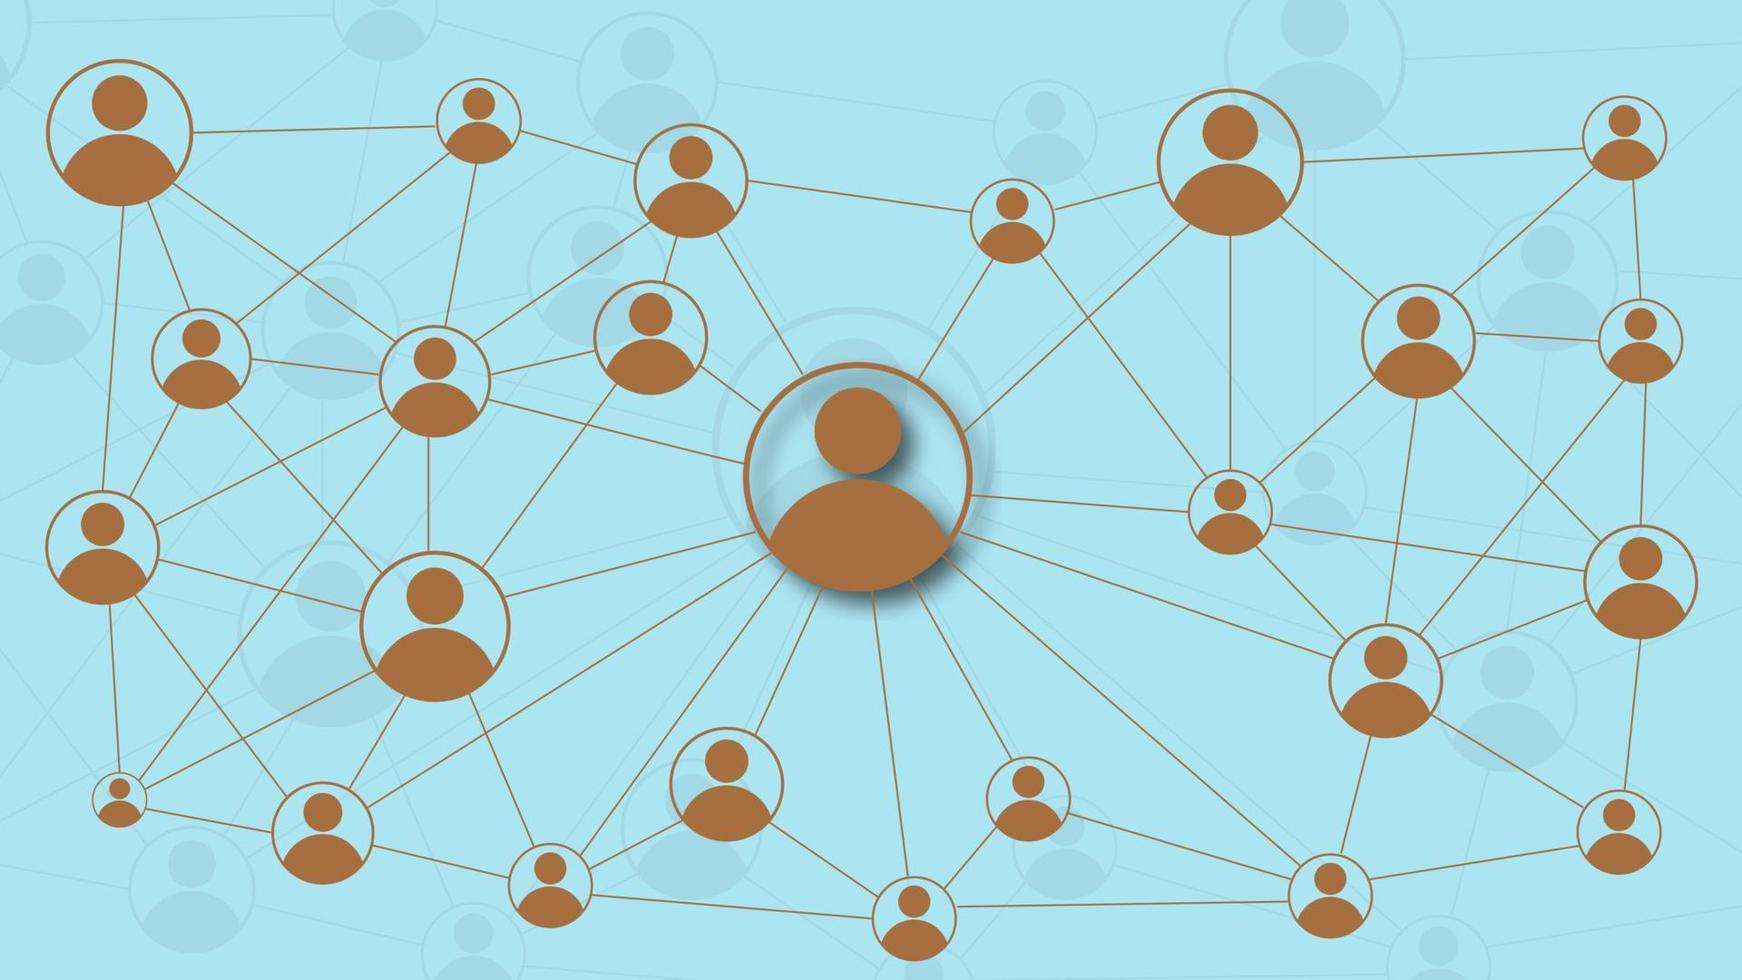 Community social network concept. Social contacts of people or user connected by lines. Vector illustration.